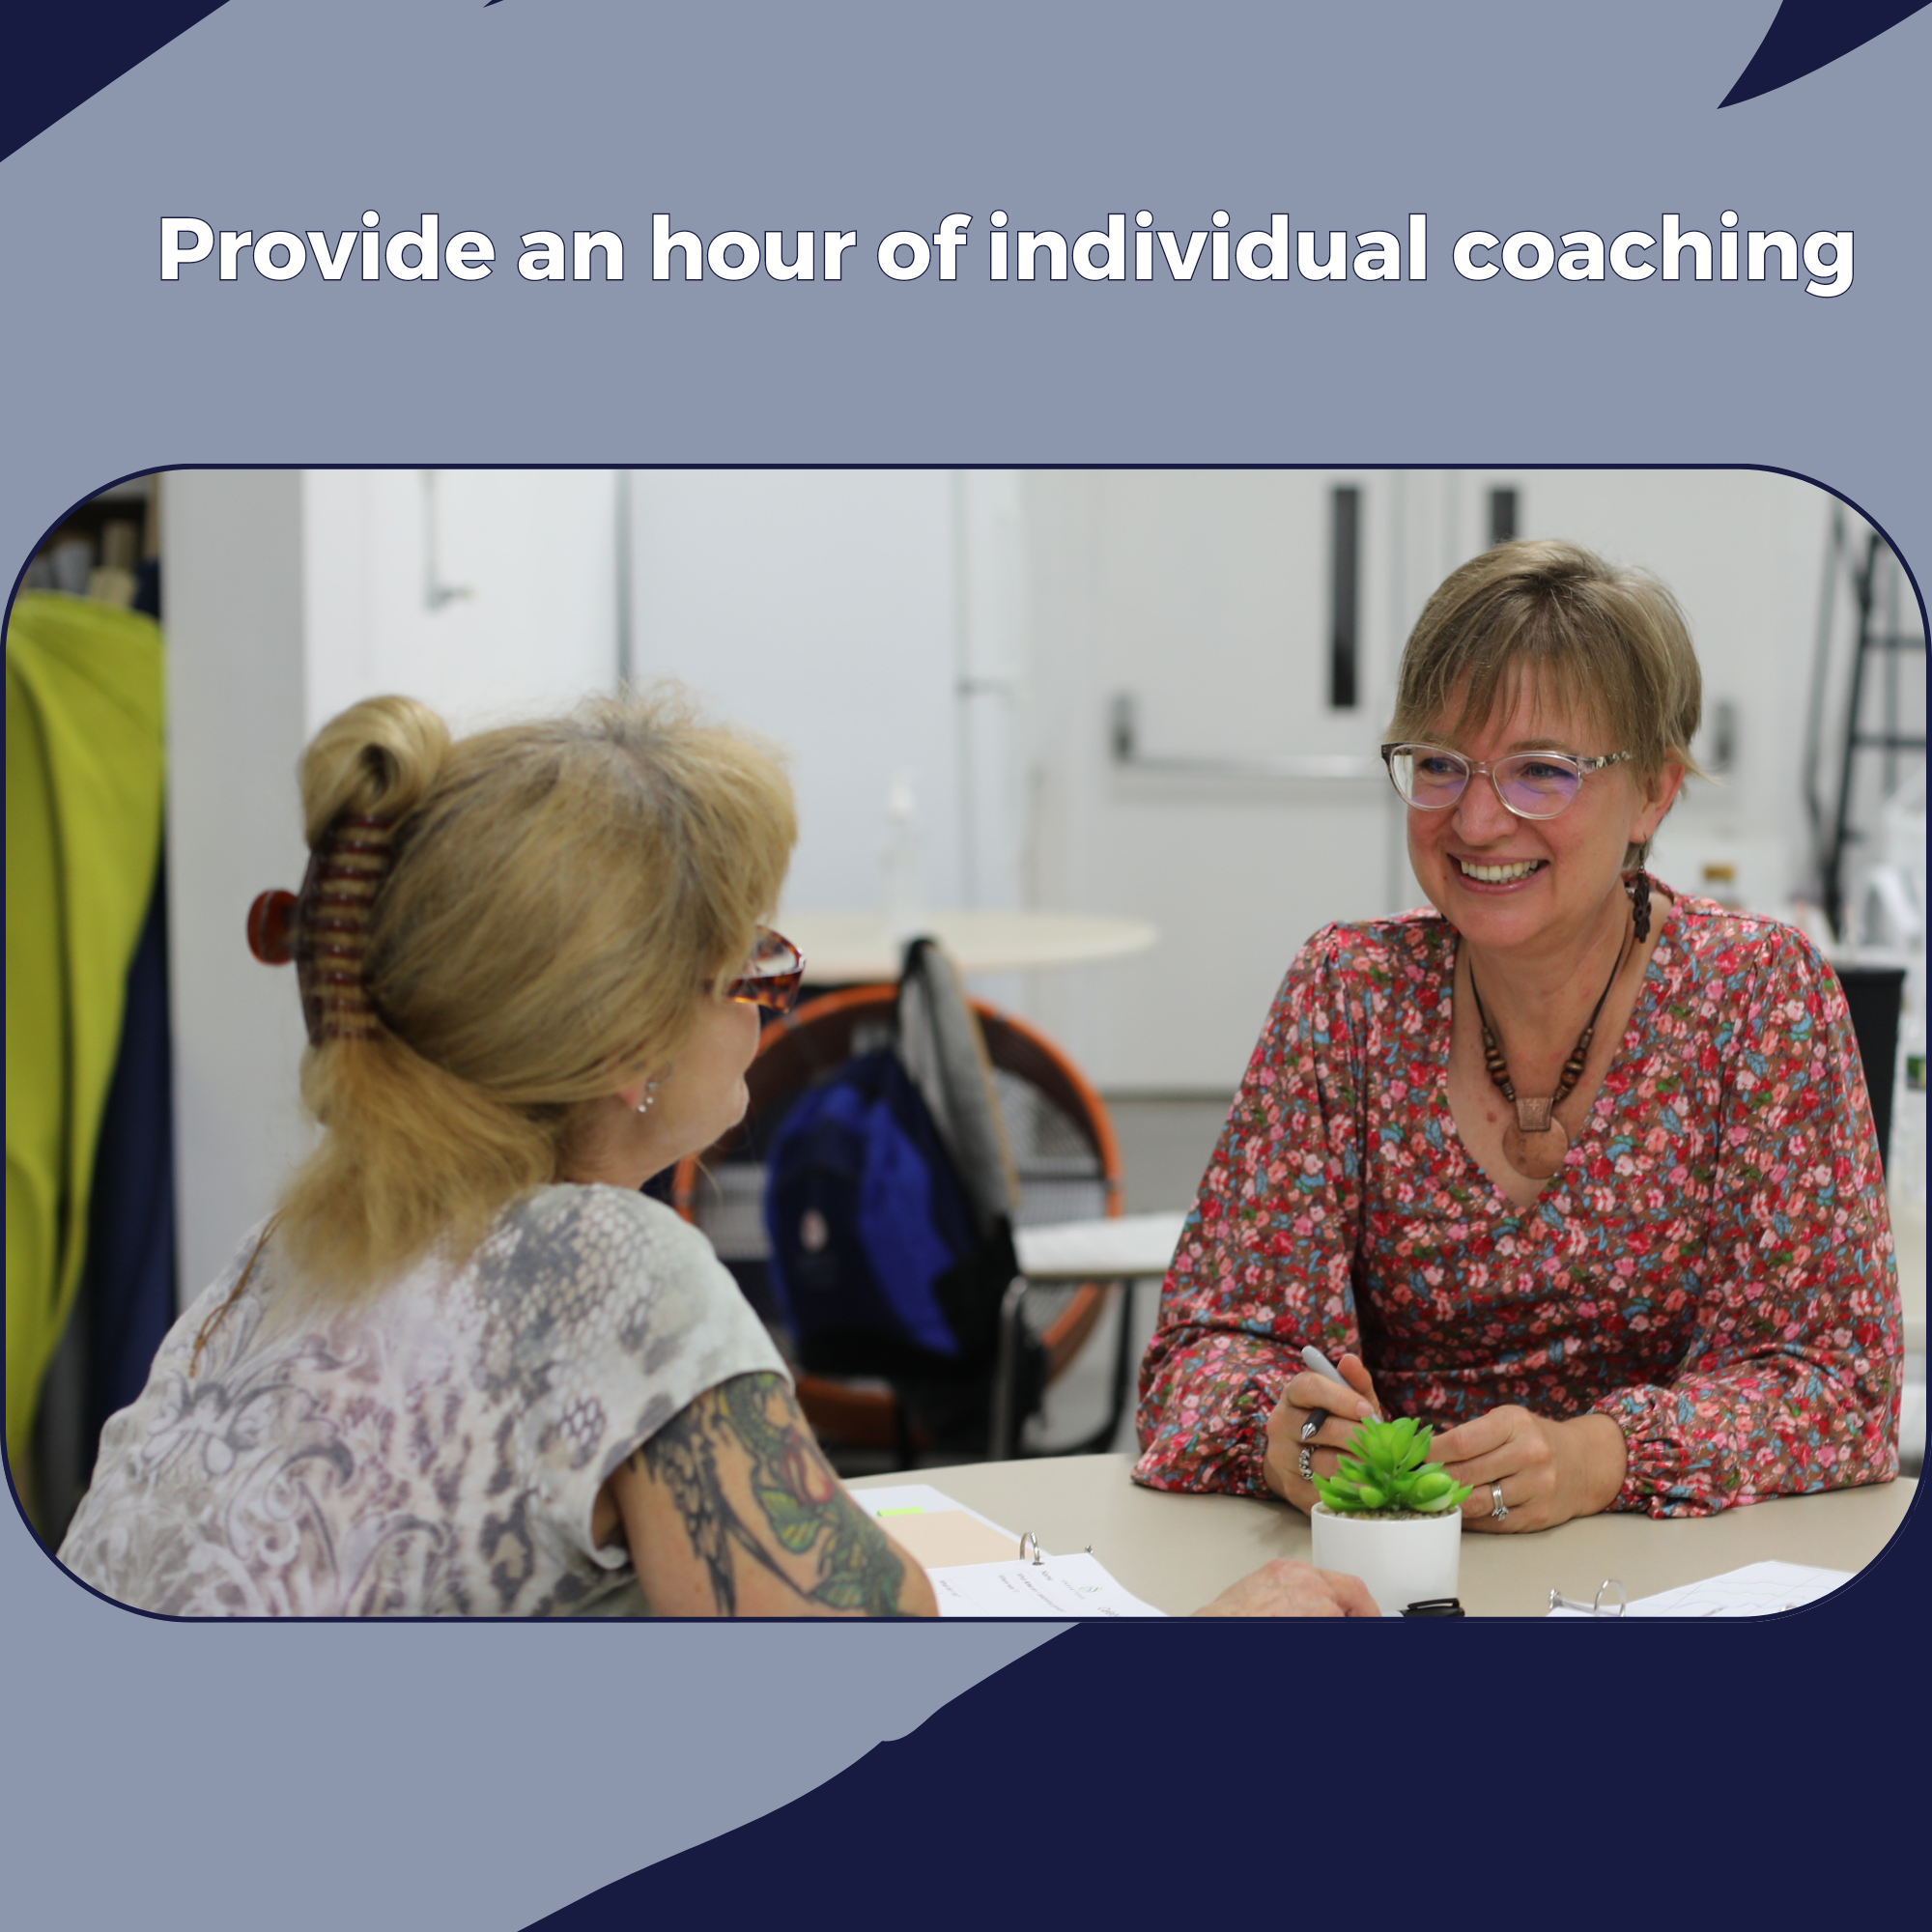 Provide an hour of individual coaching to help women grow to their full potential